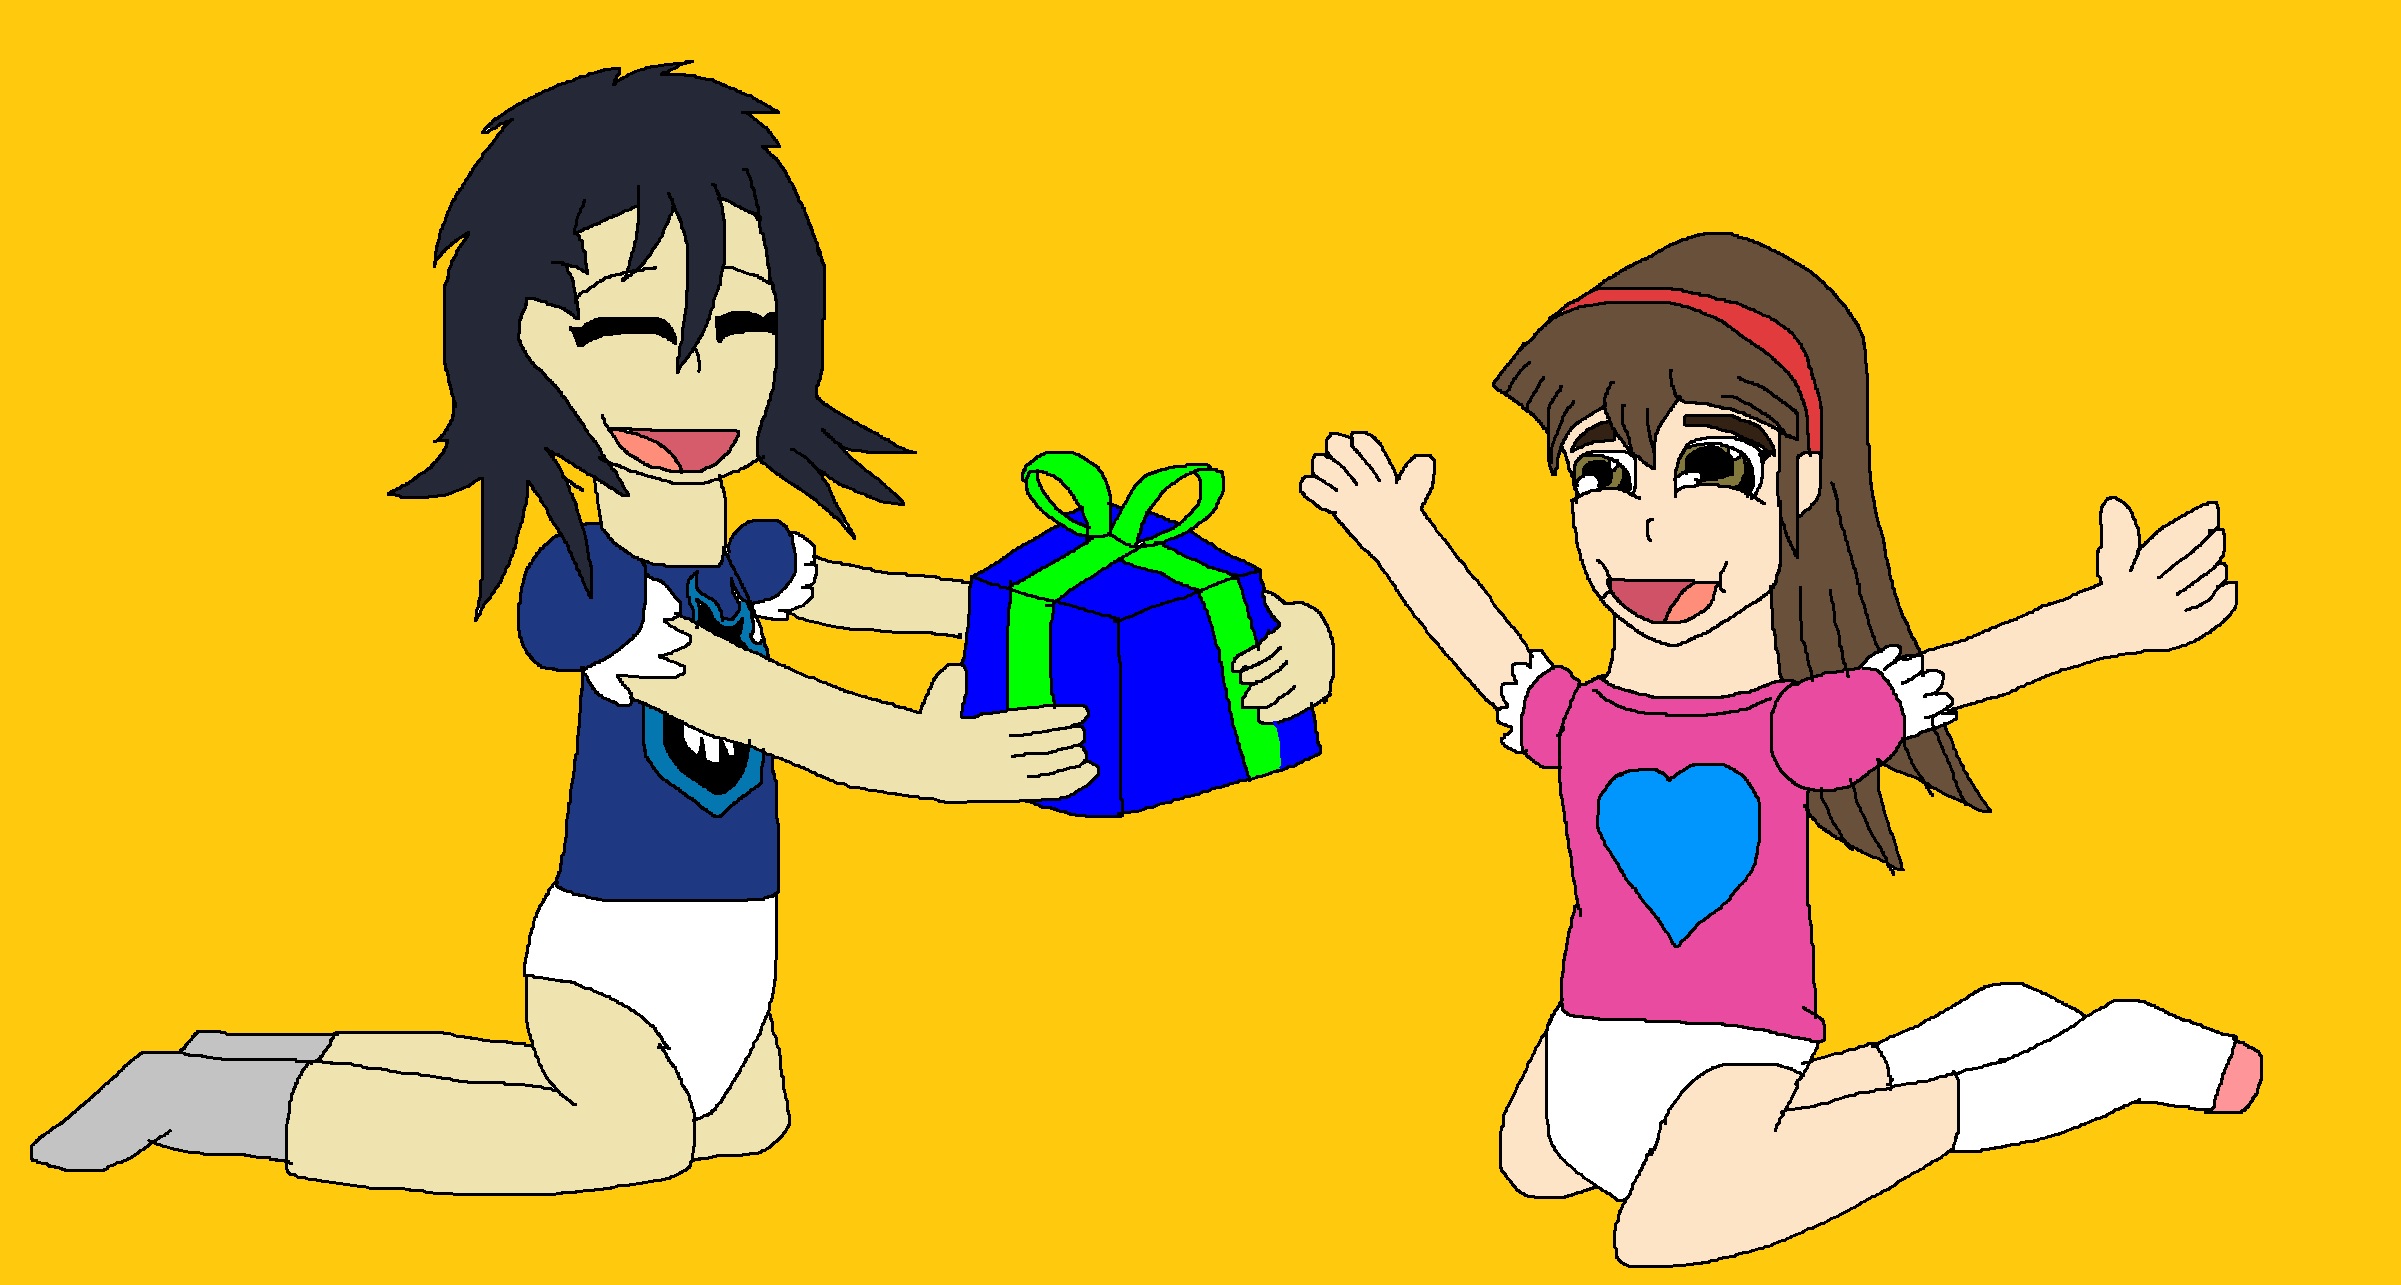 Yuriko is giving to present to Lily by Rainbow-Dash-Rockz